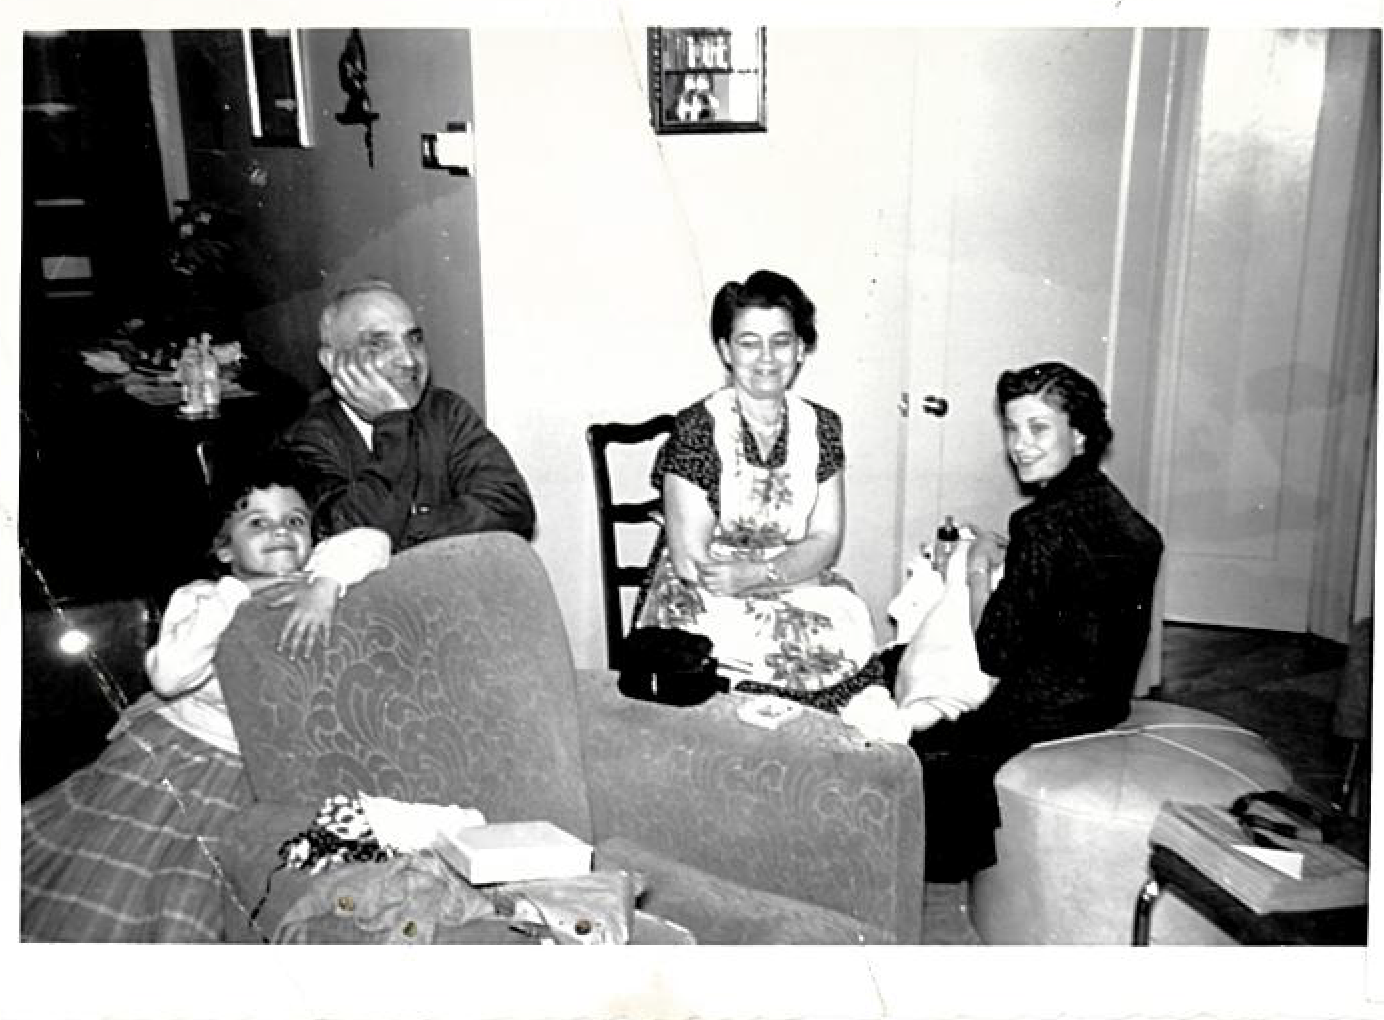 An old black-and-white photo of a family in their living room